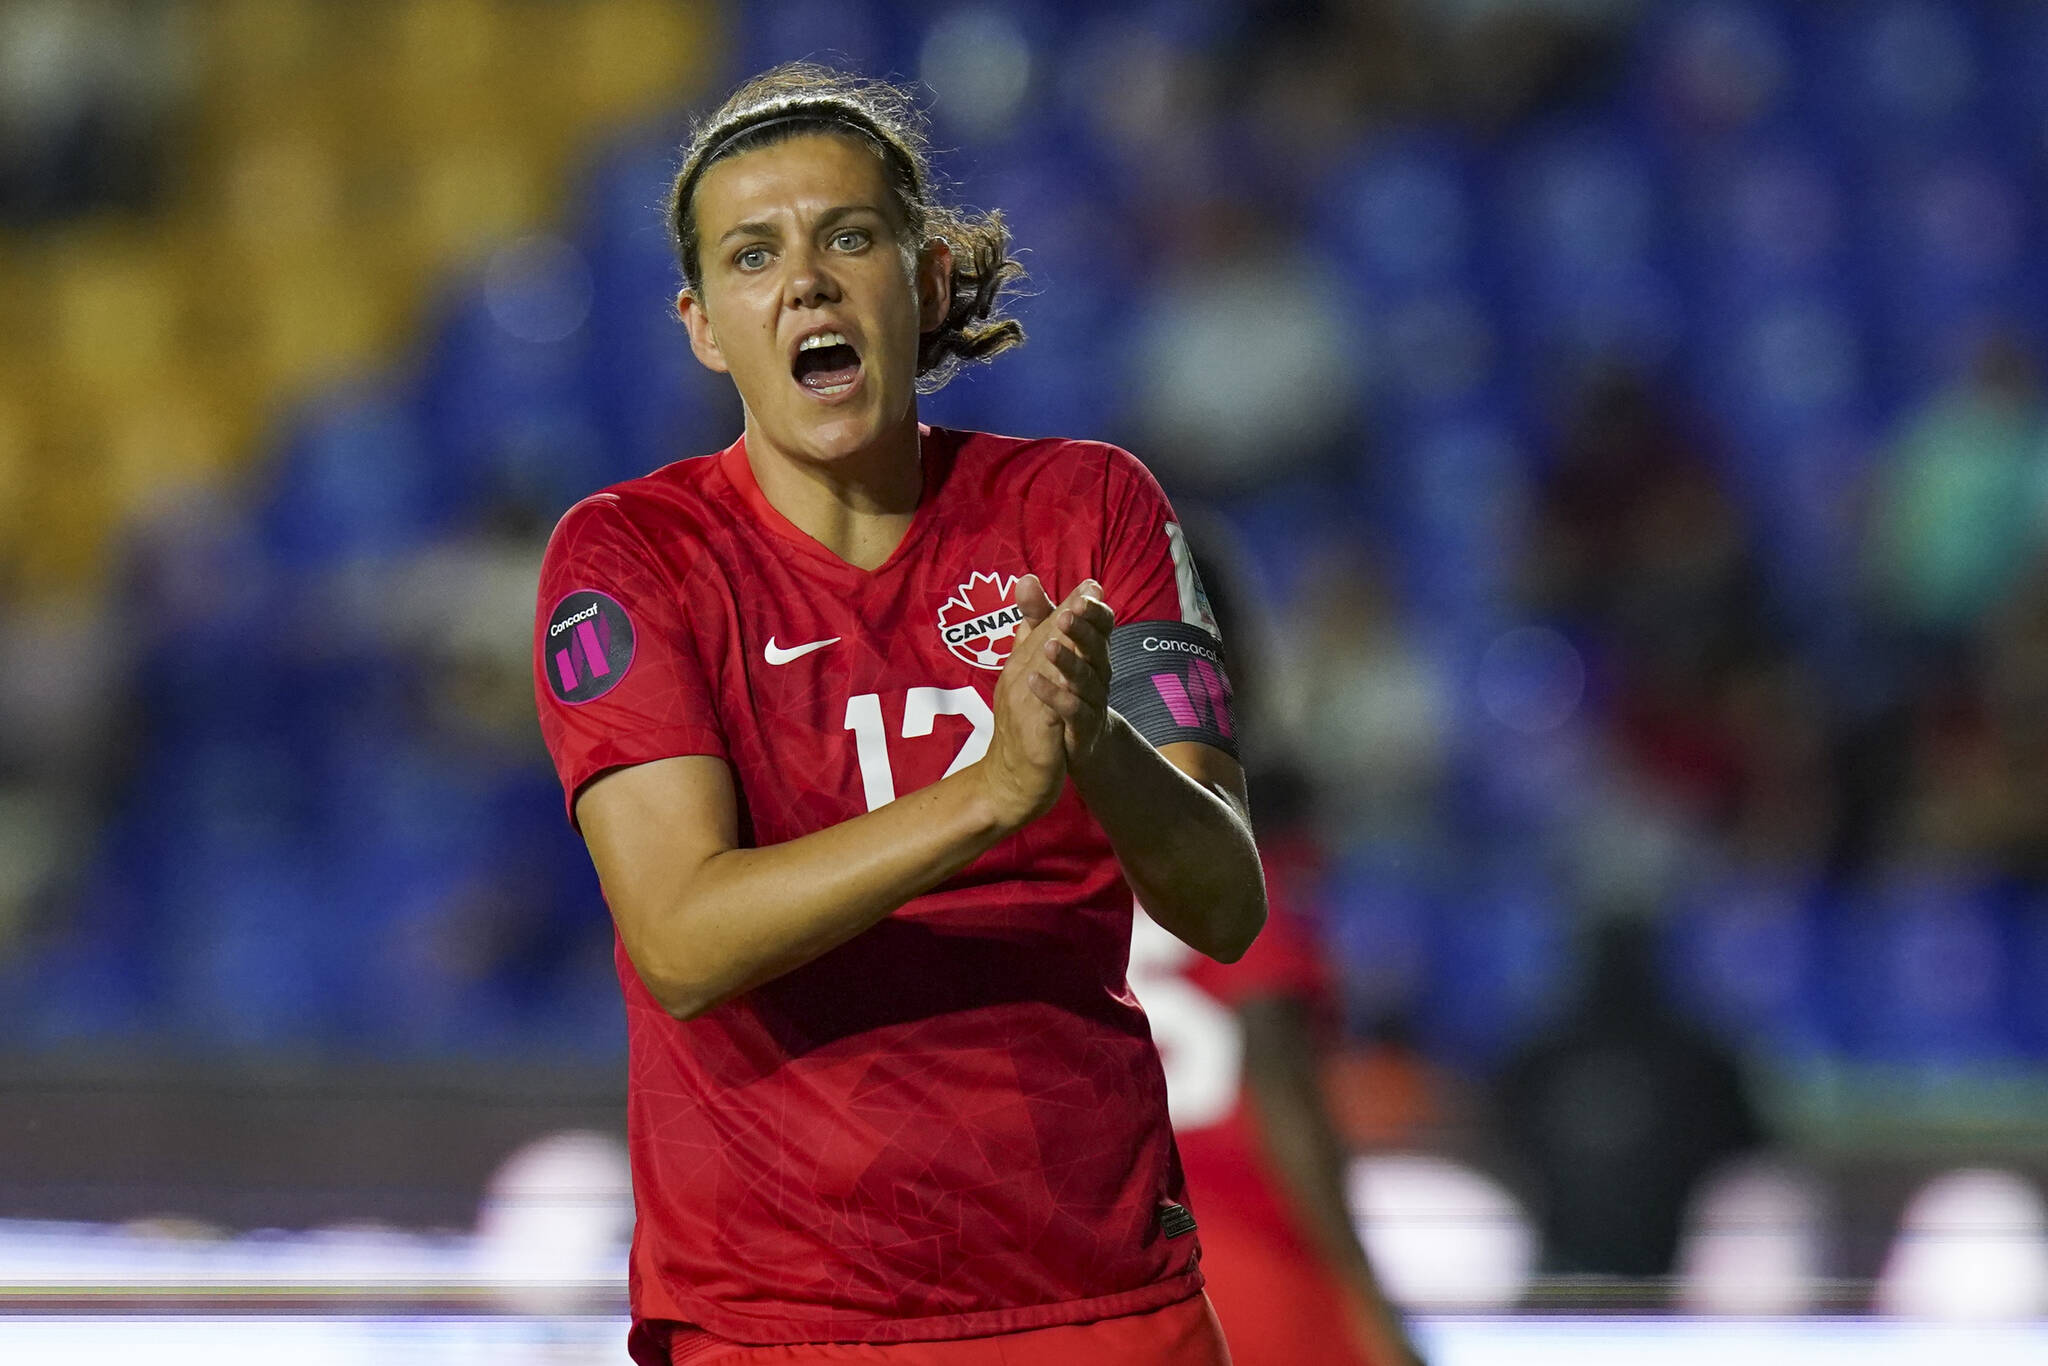 FILE - Canada’s Christine Sinclair reacts during a CONCACAF Women’s Championship soccer semifinal match against Jamaica in Monterrey, Mexico, Thursday, July 14, 2022. Sinclair has played for the Portland Thorns since 2013, at the start of the National Women’s Soccer League. Now the Thorns are preparing for Saturday’s NWSL championship game in Washington D.C. against the Kansas City Current, in a match broadcast in primetime on CBS.(AP Photo/Fernando Llano, File)